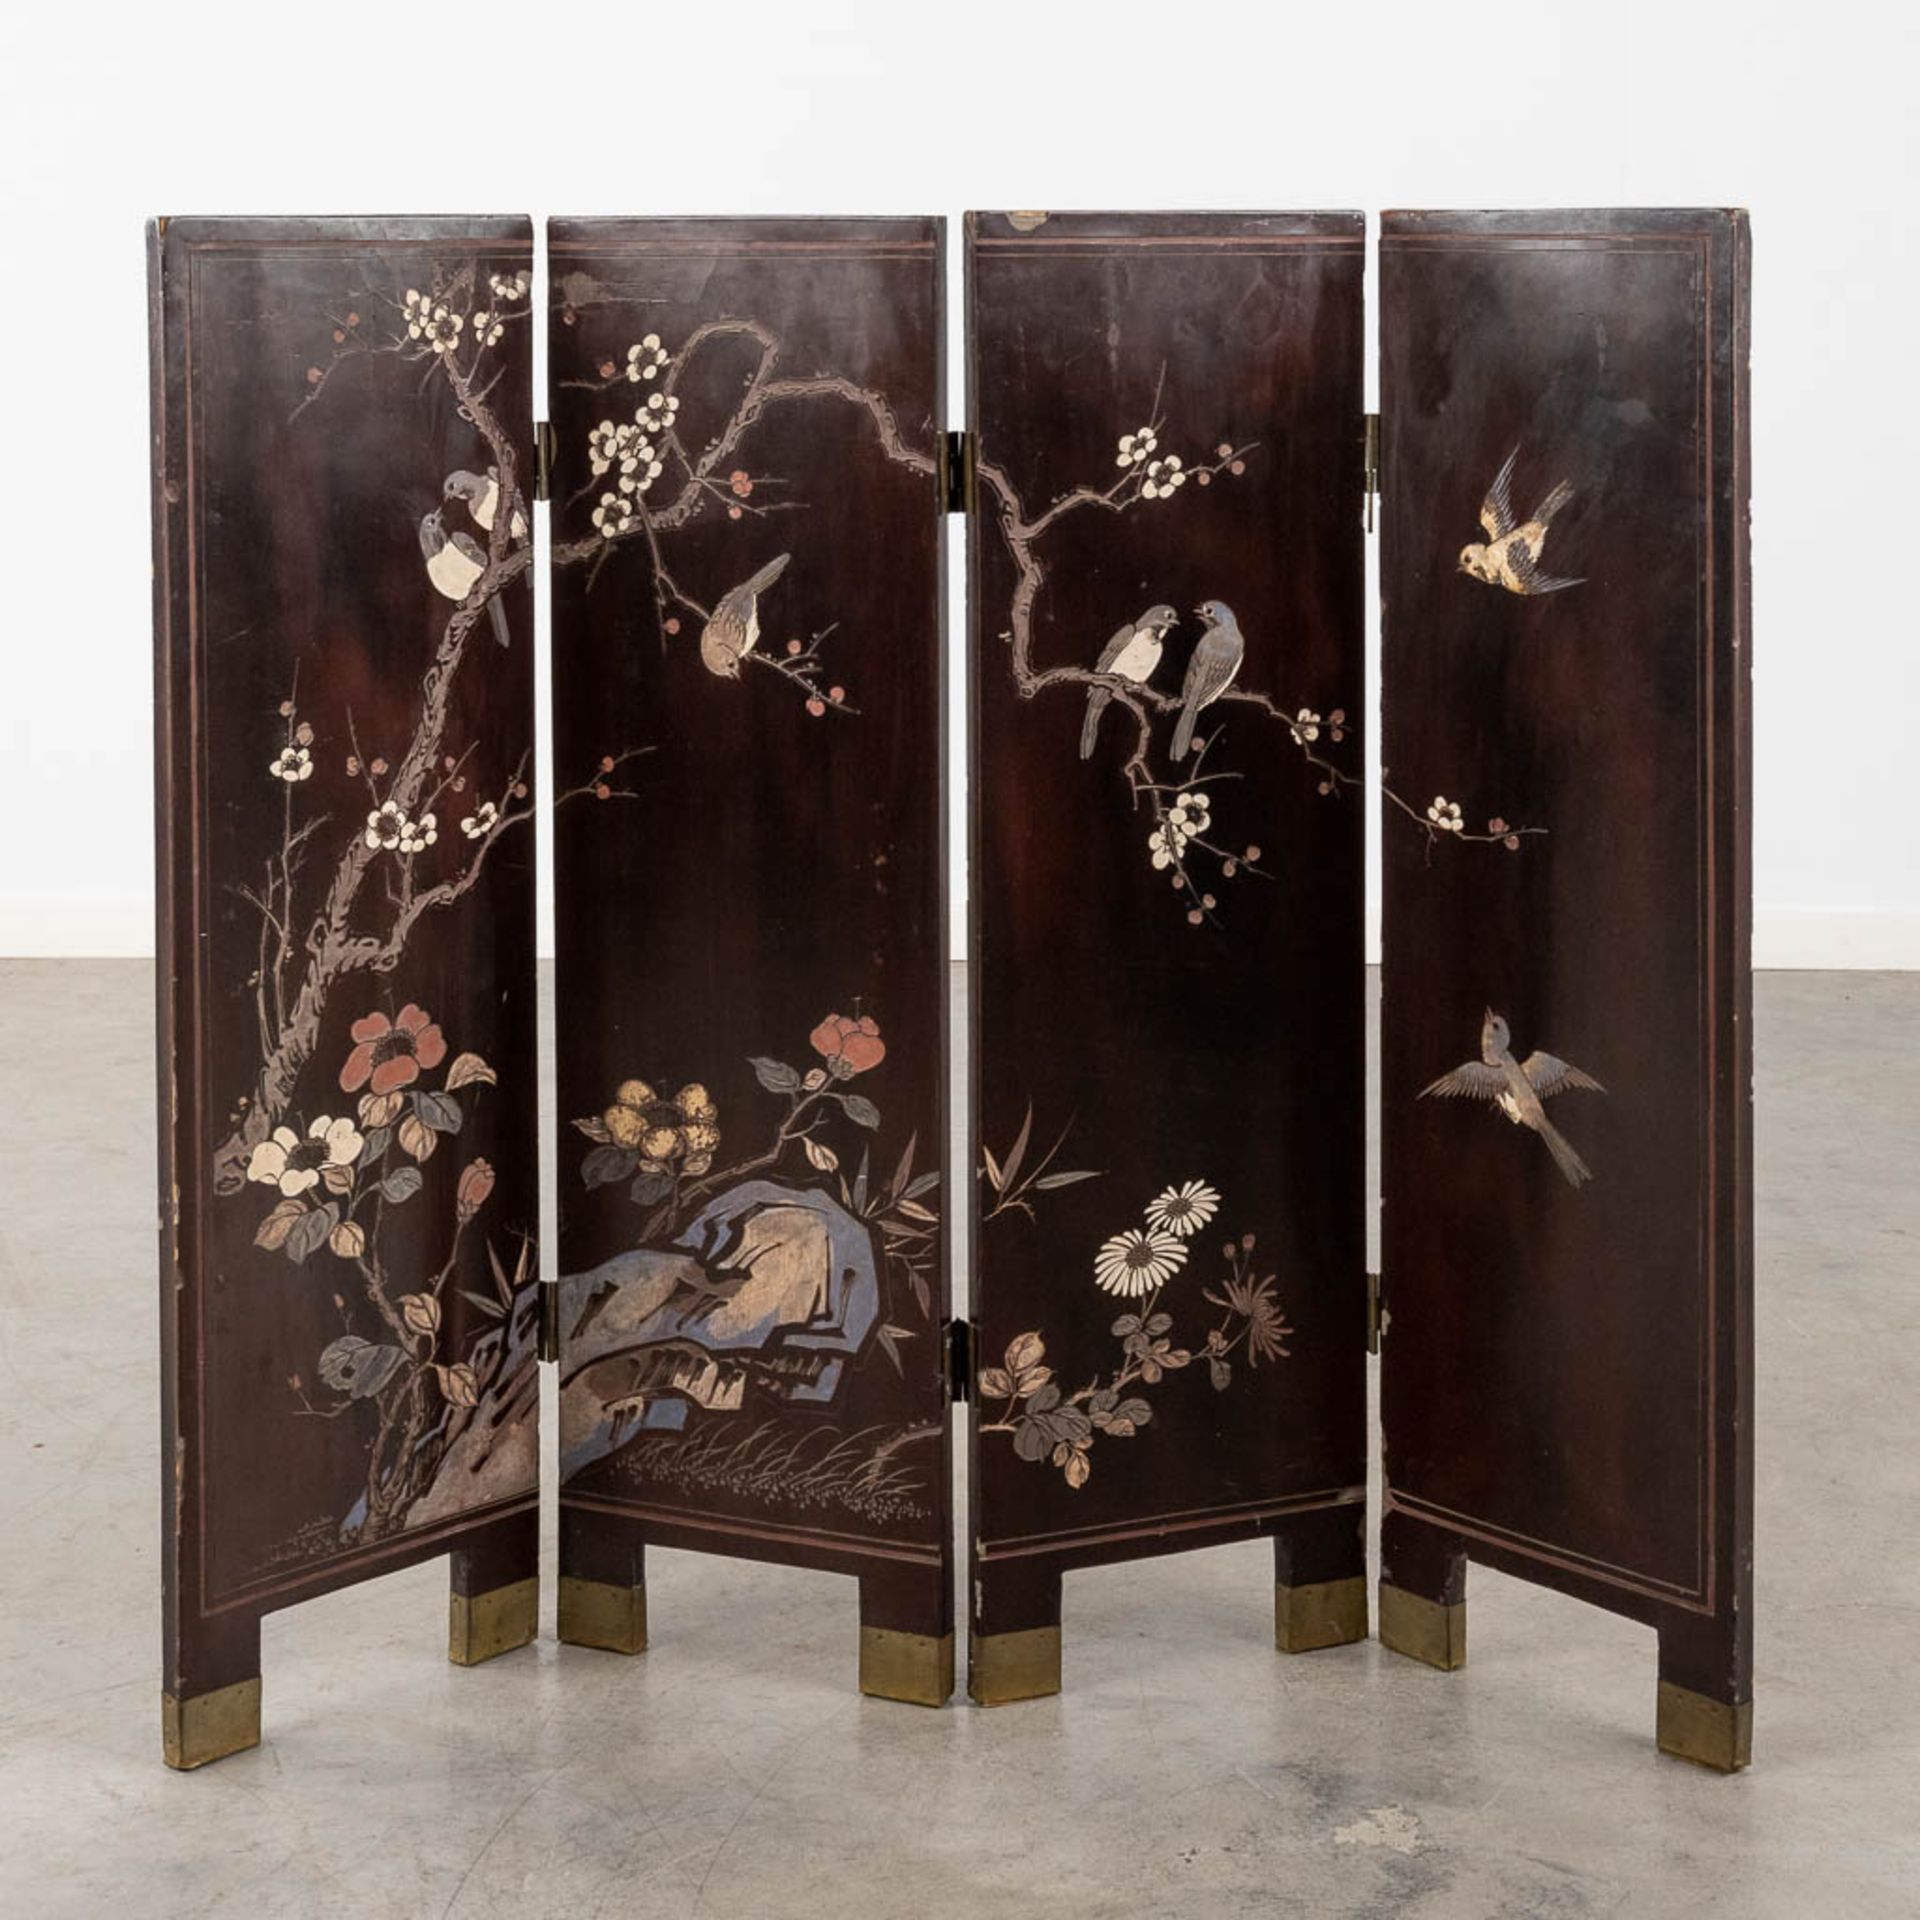 A room divider, screen with Chinoiserie decors, Fauna, Flora and playing children. Circa 1900. (W:10 - Image 11 of 17